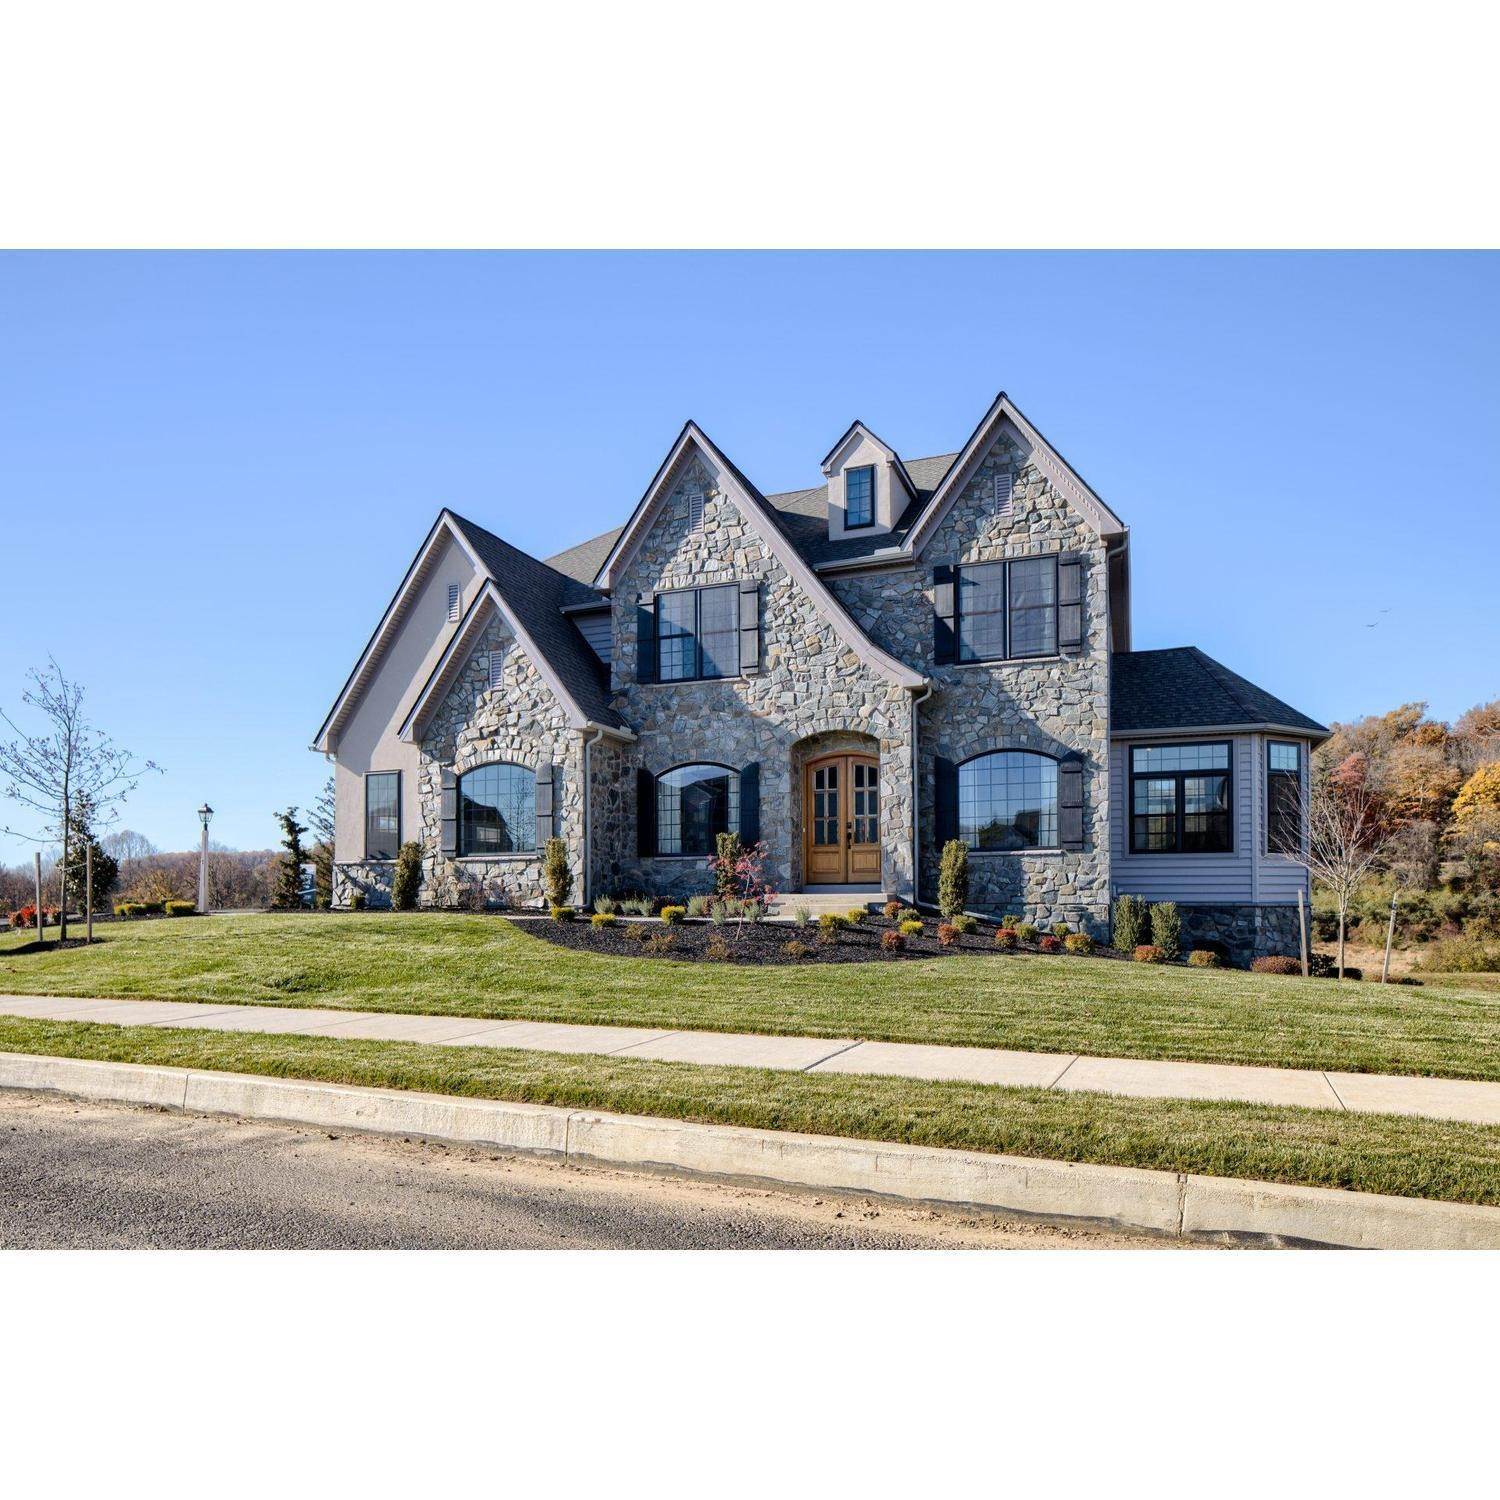 3. 101 Parkview Way, Newtown Square, PA 19073에 Ventry at Edgmont Preserve 건물